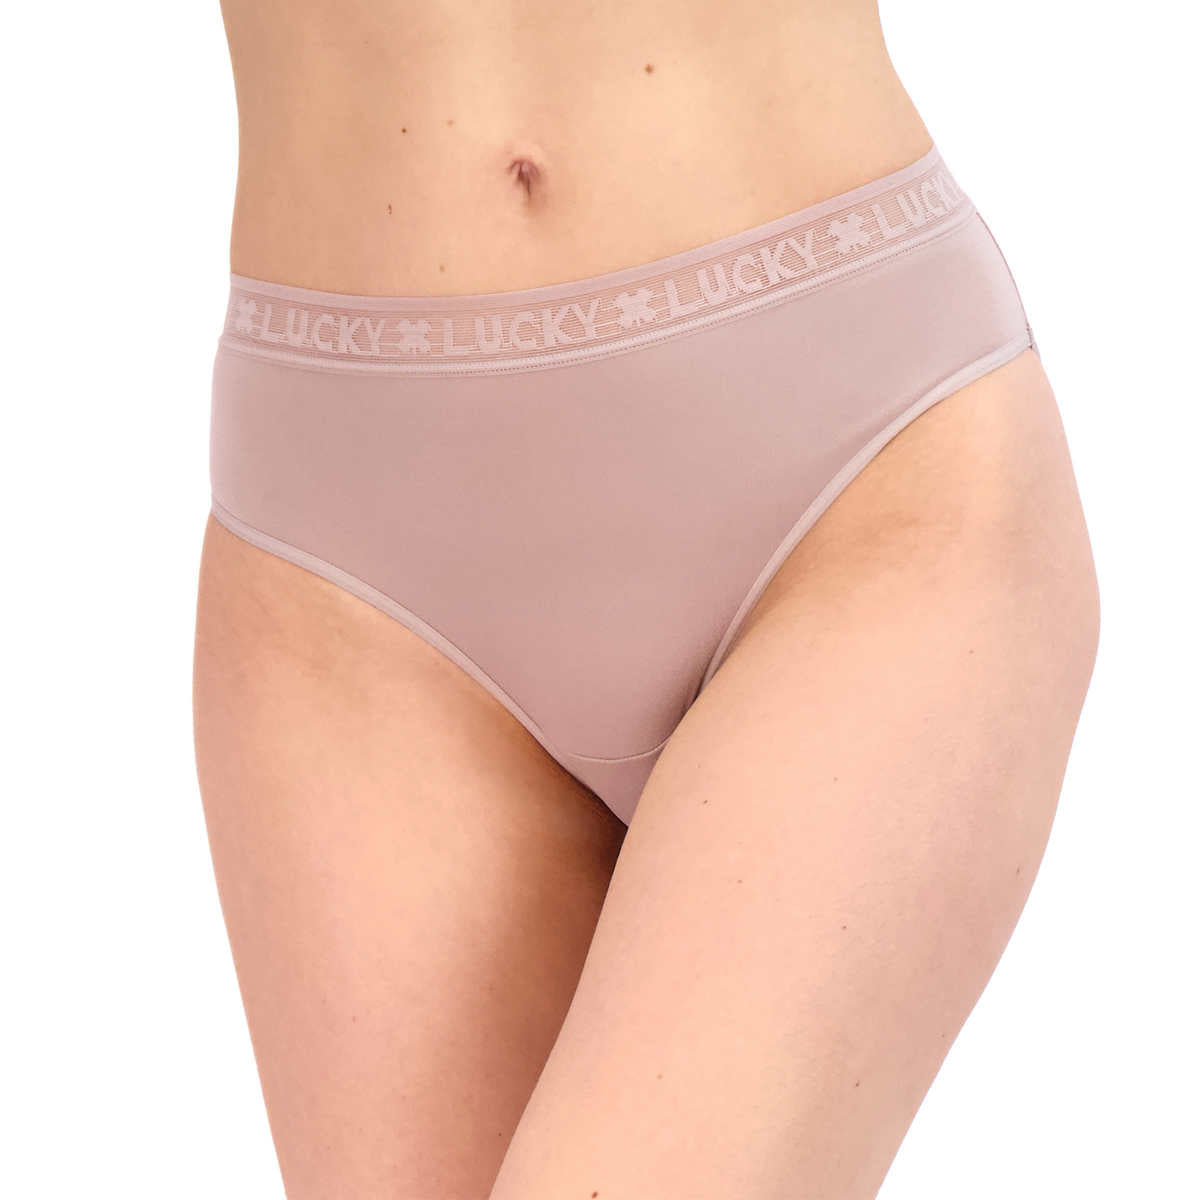 SUPER SALE! Lucky Brand 🍀 panties AUTHENTIC, Women's Fashion